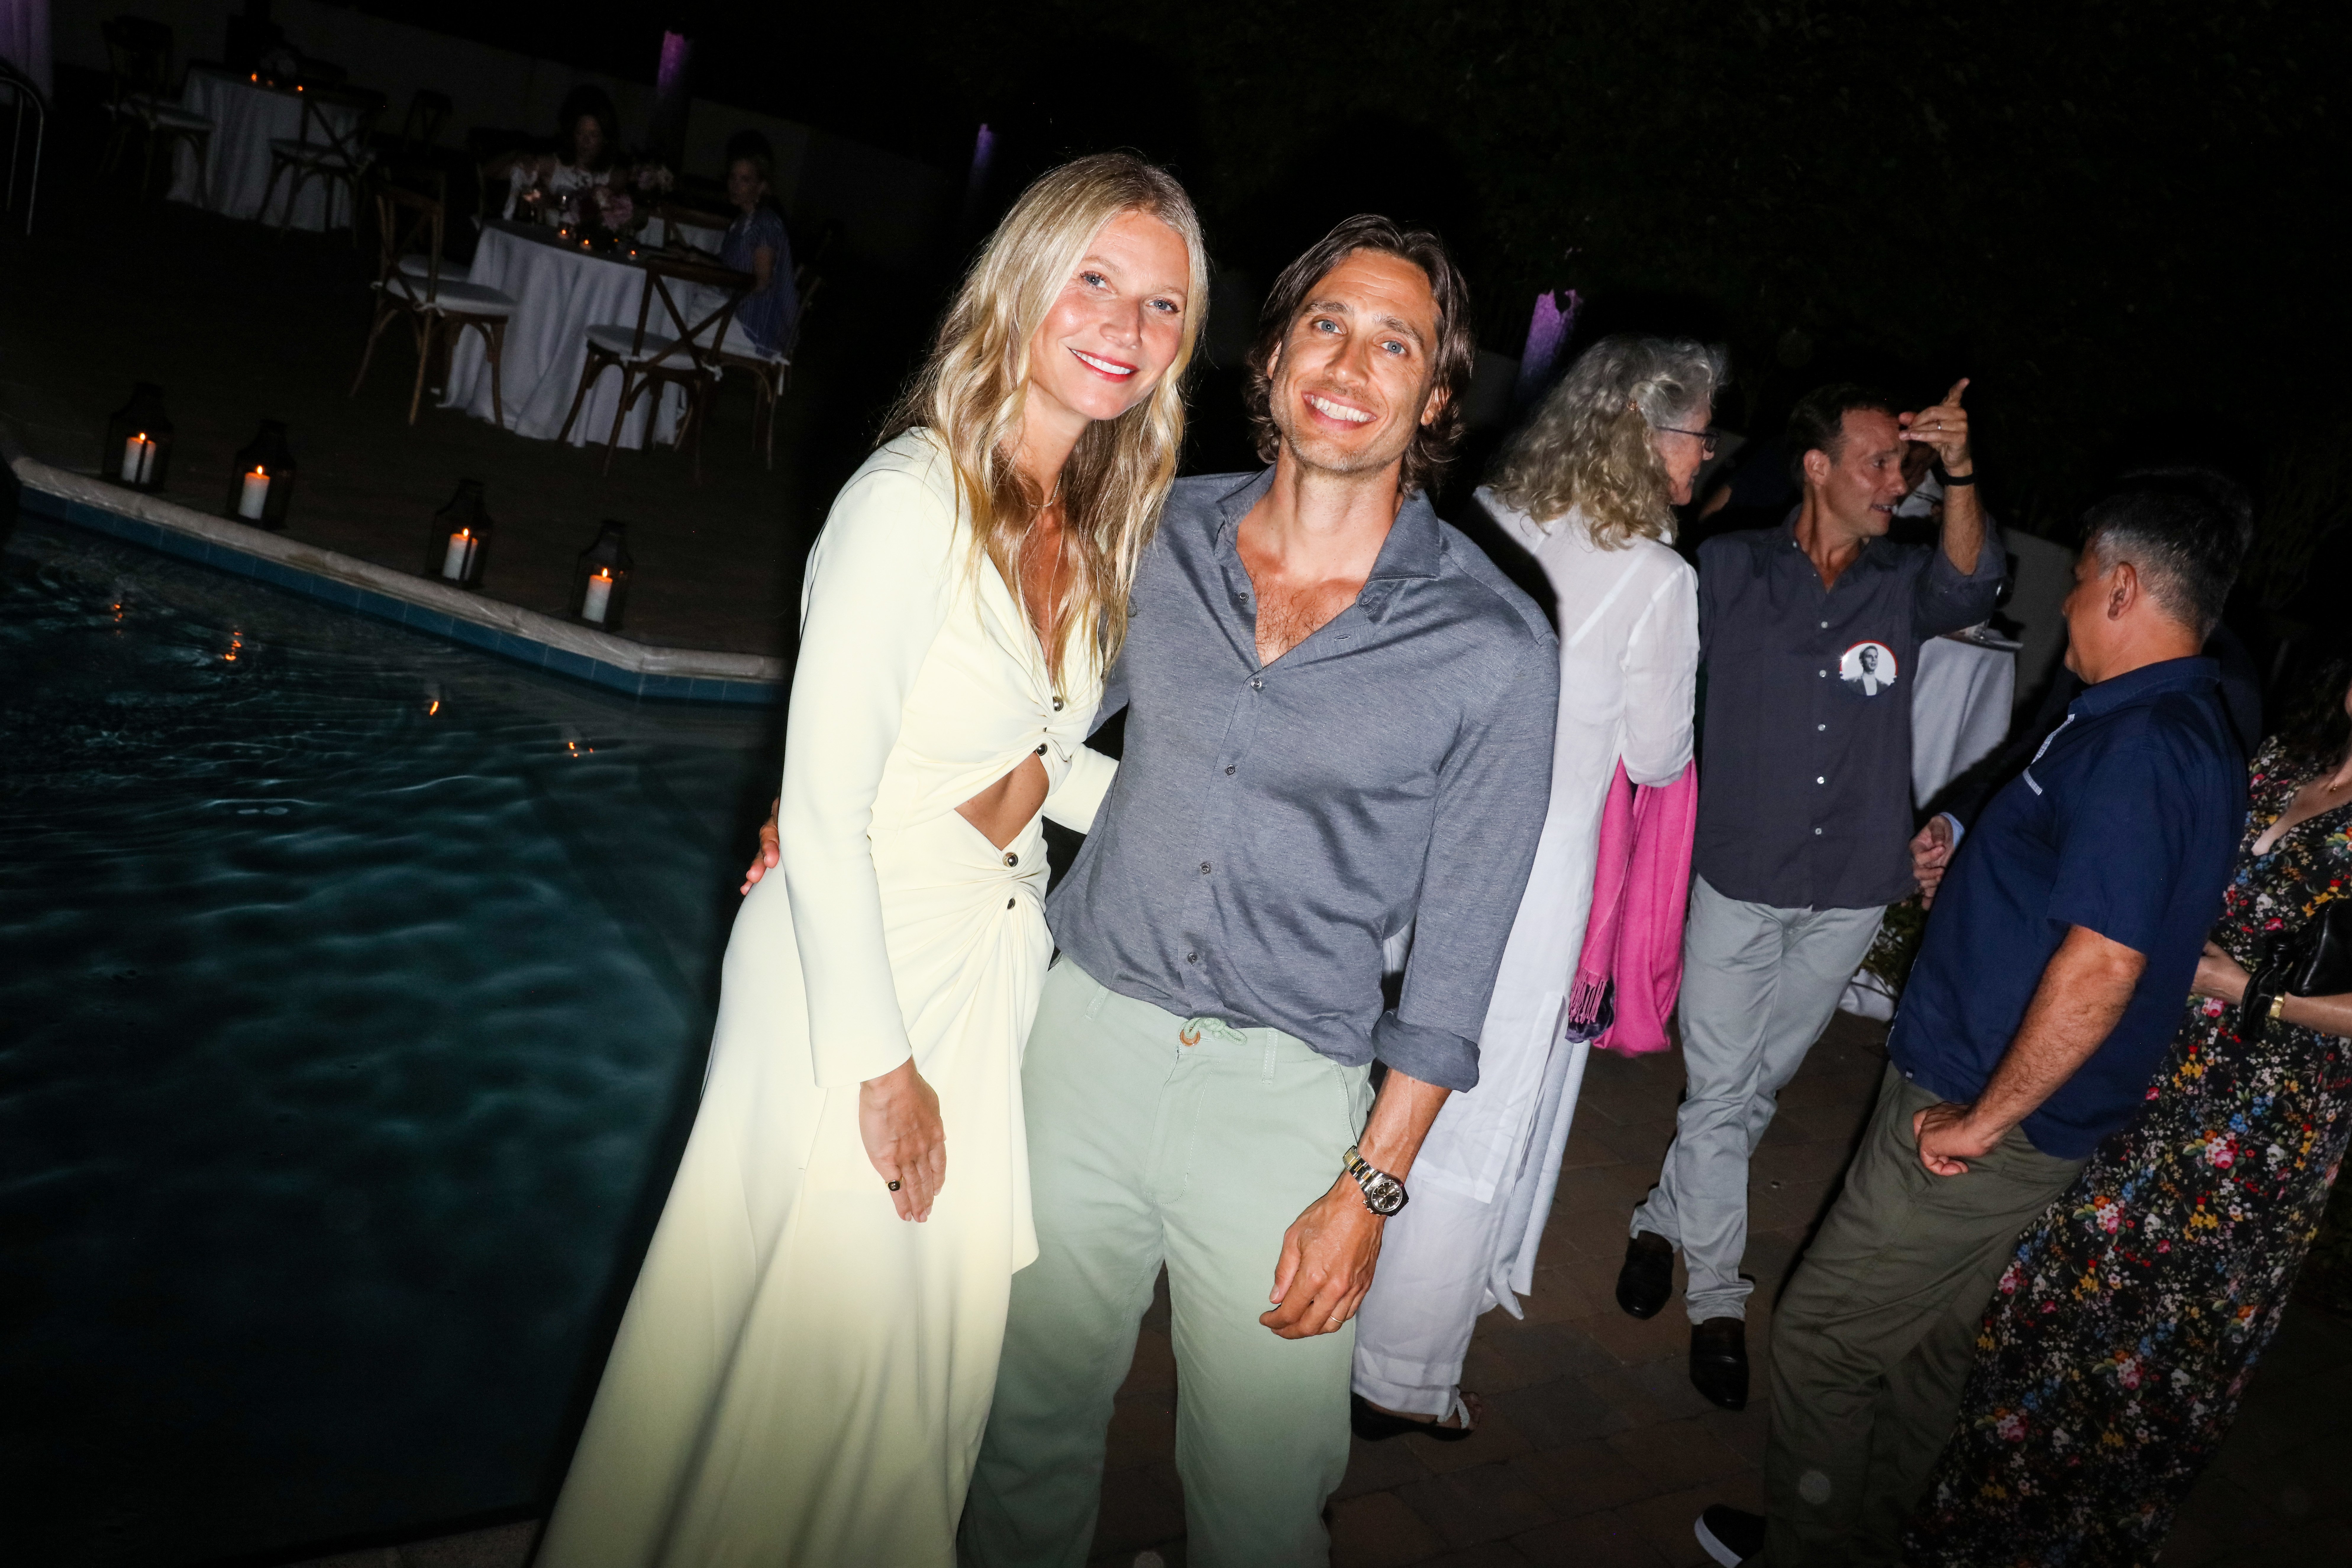 Gwyneth Paltrow and husband Brad Falchuk attending a promotional party for "The Politician" at a private home on August 2, 2019 in East Hampton, New York. / Source: Getty Images